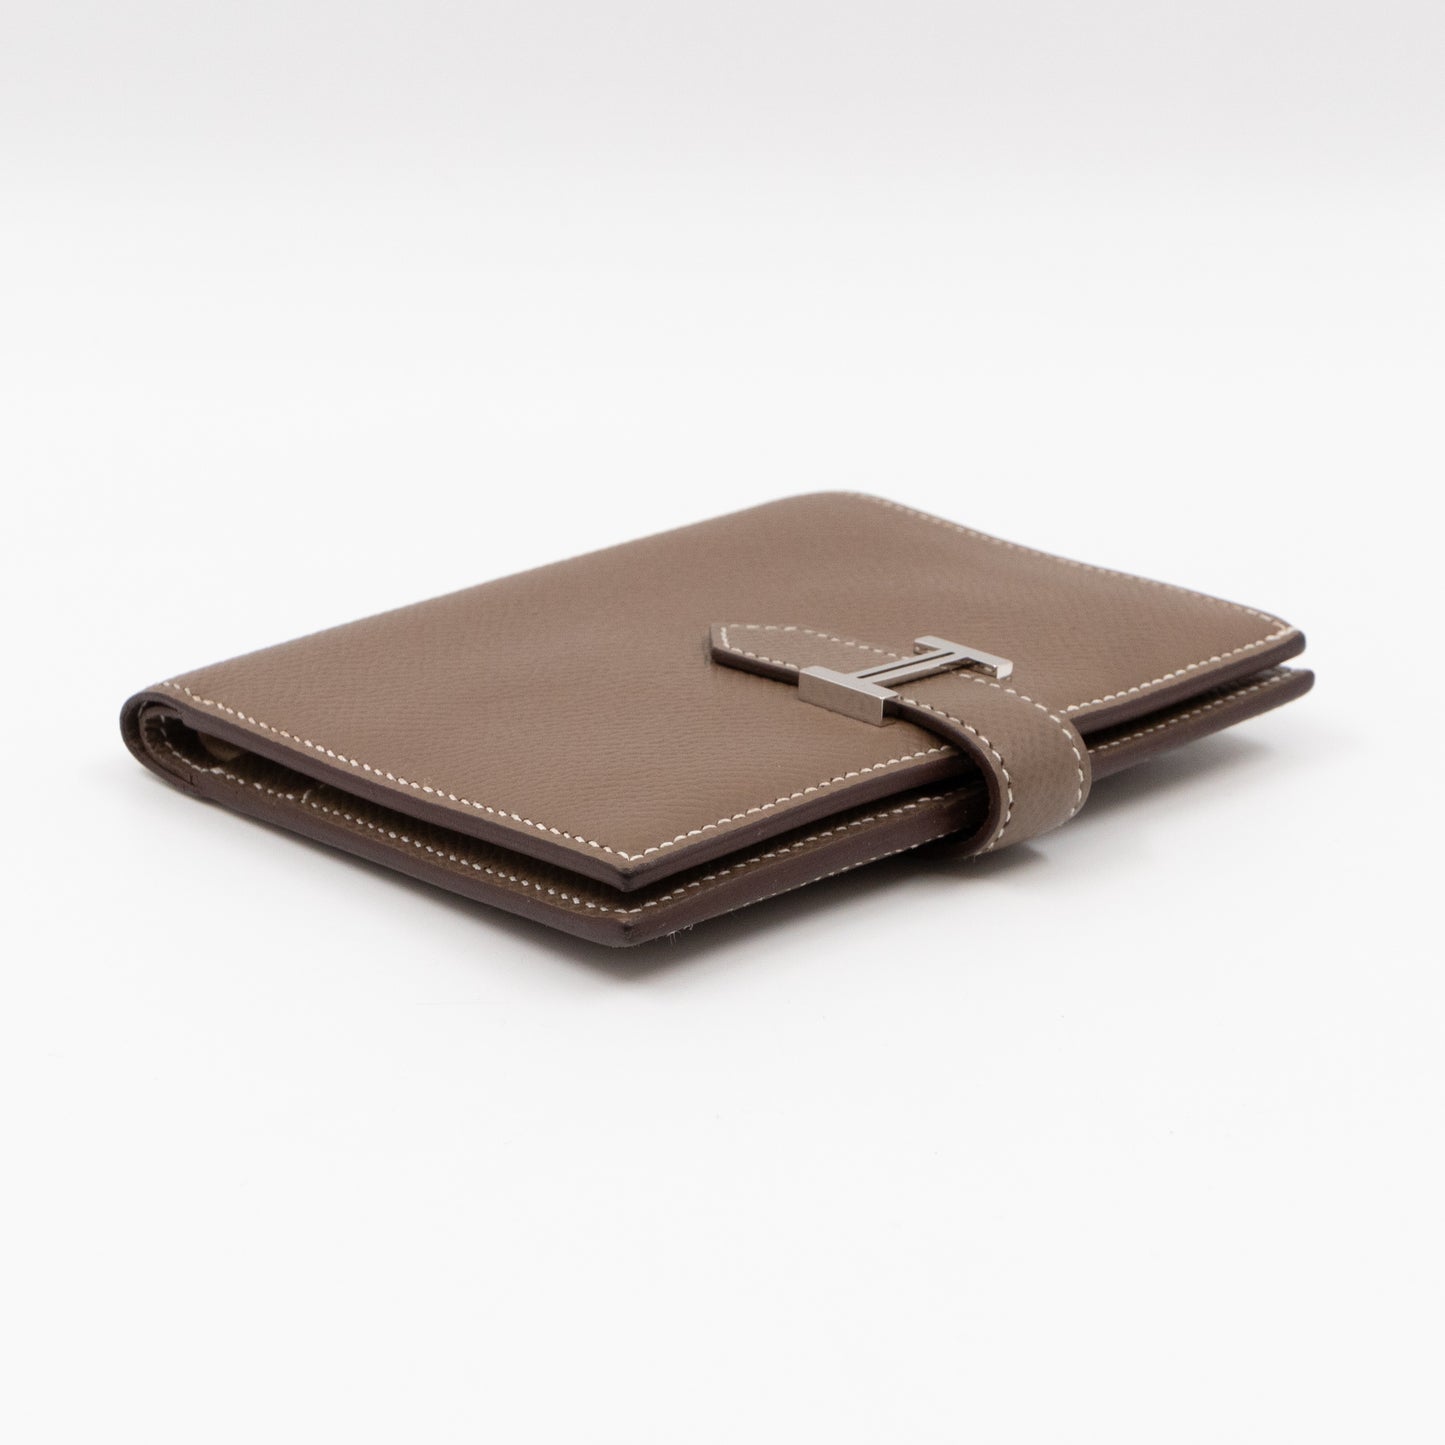 Bearn Compact Wallet Etoupe Leather